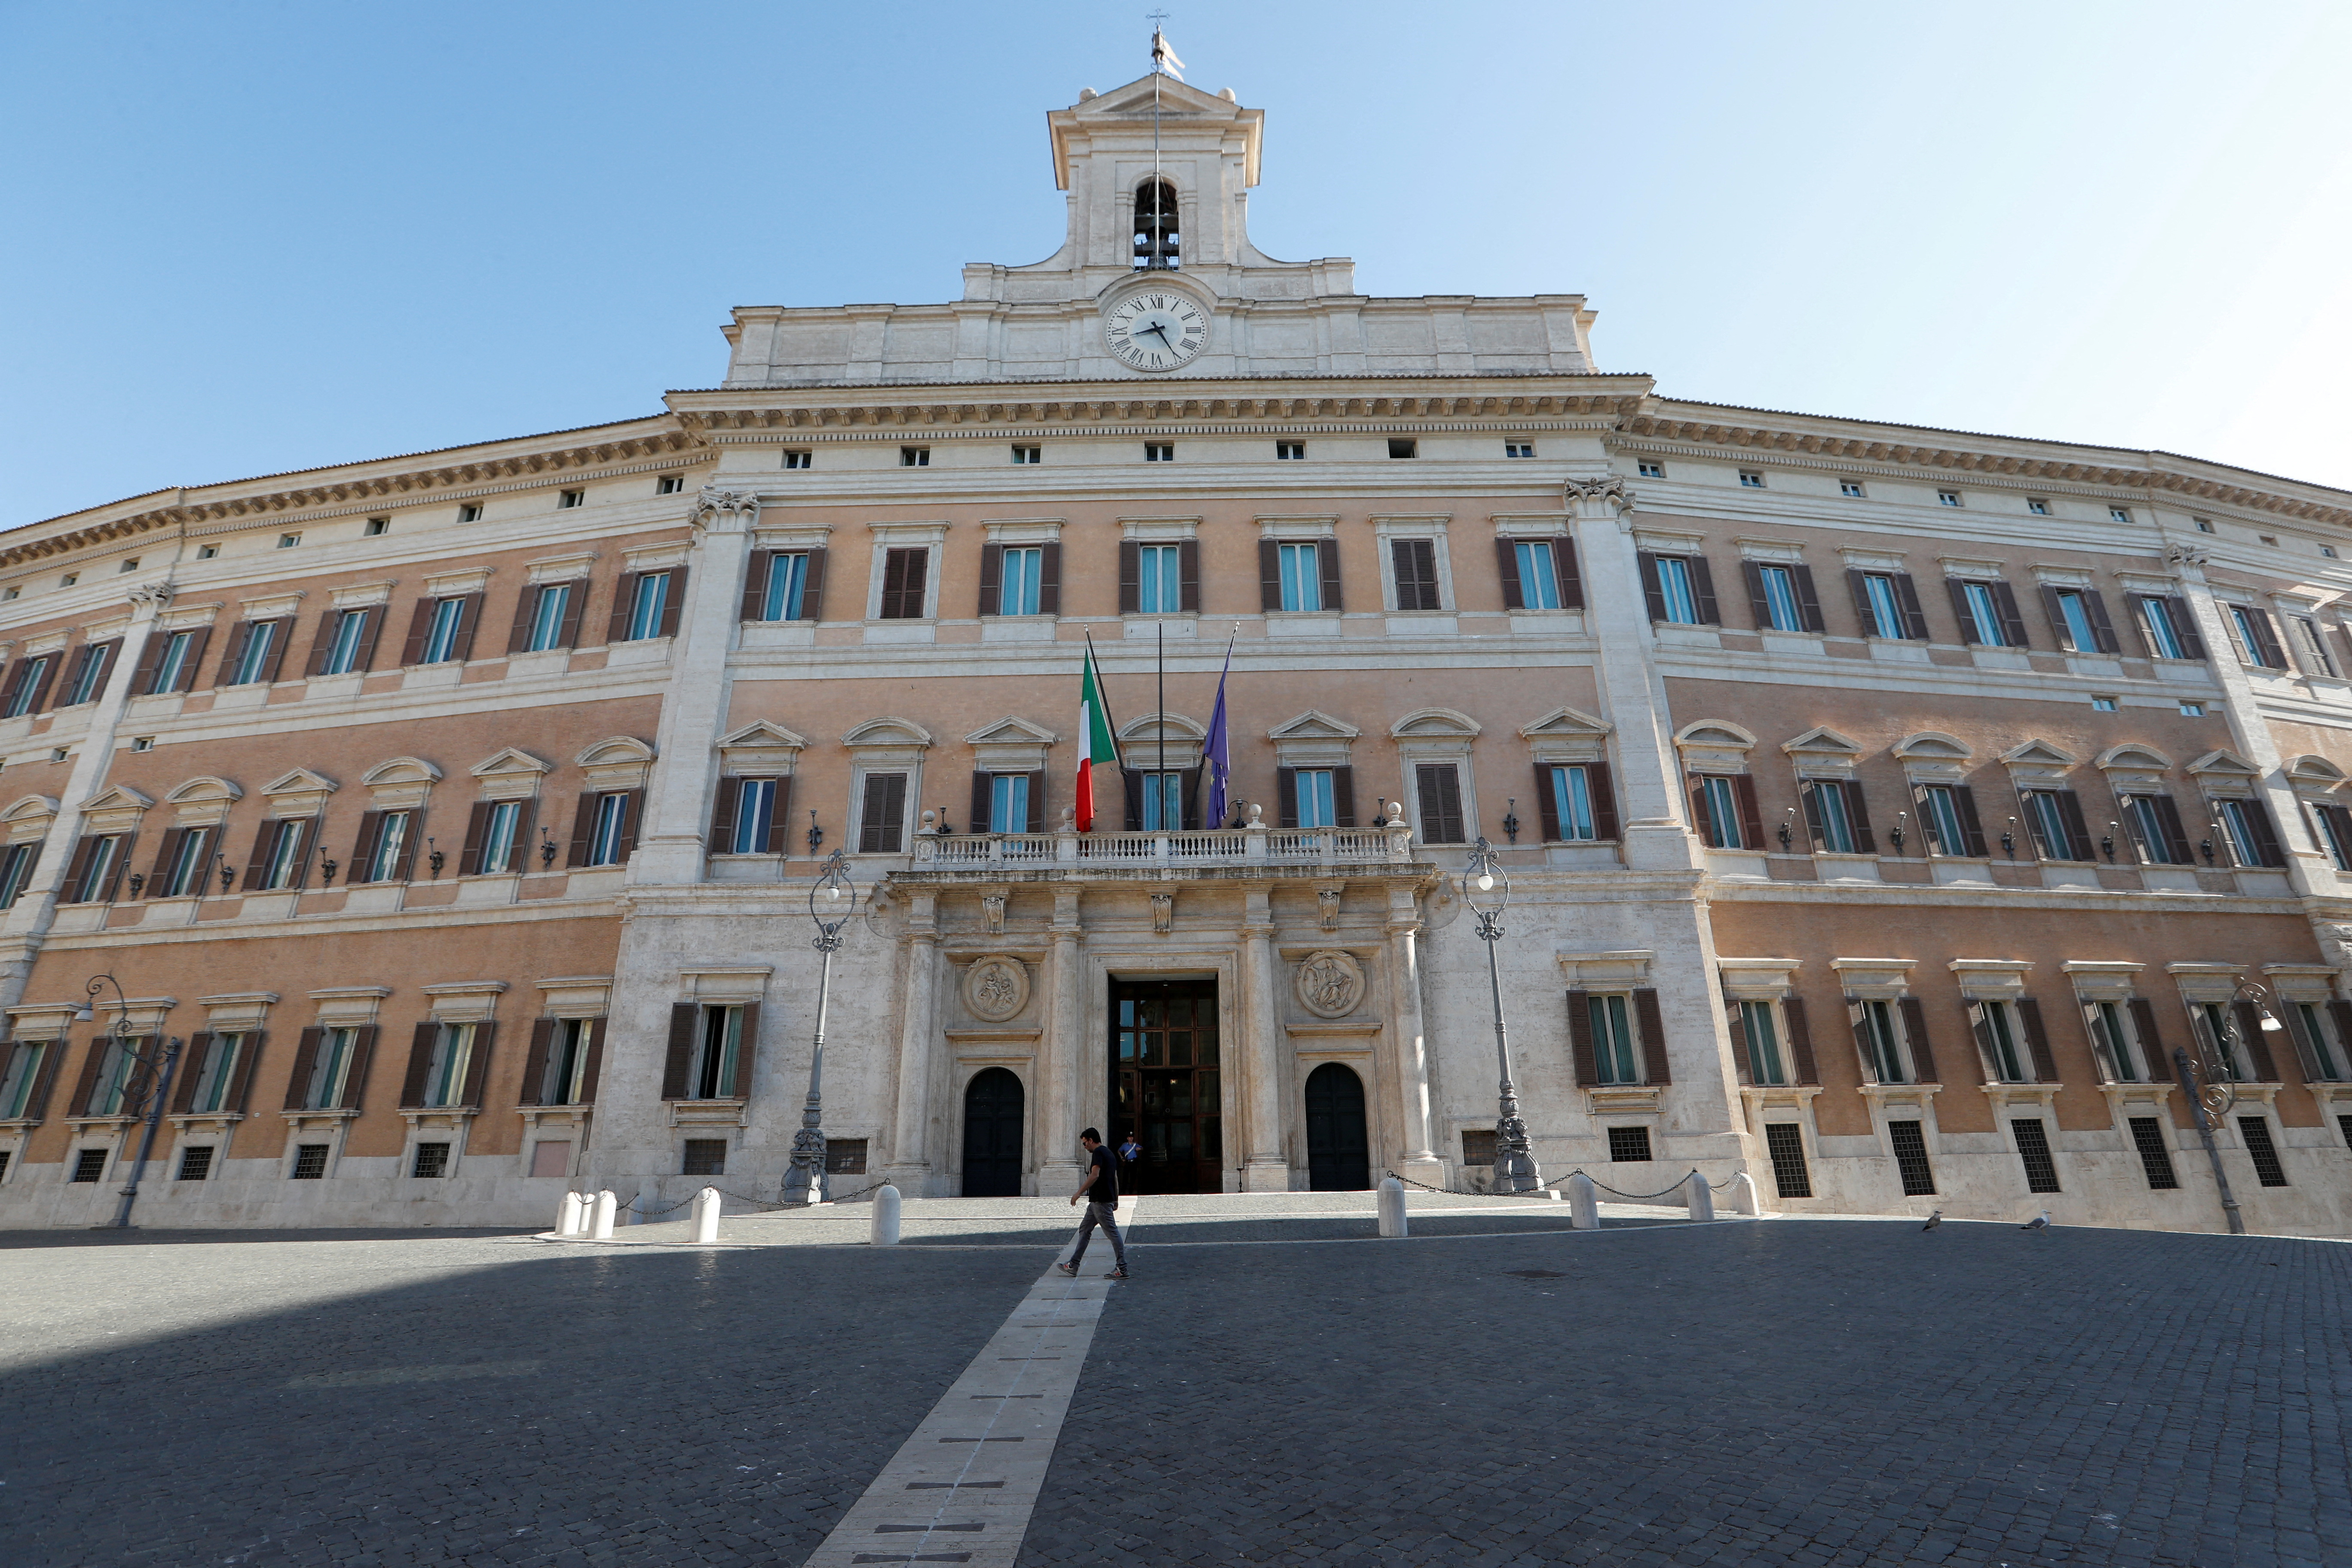 A general view of Montecitorio Palace in Rome